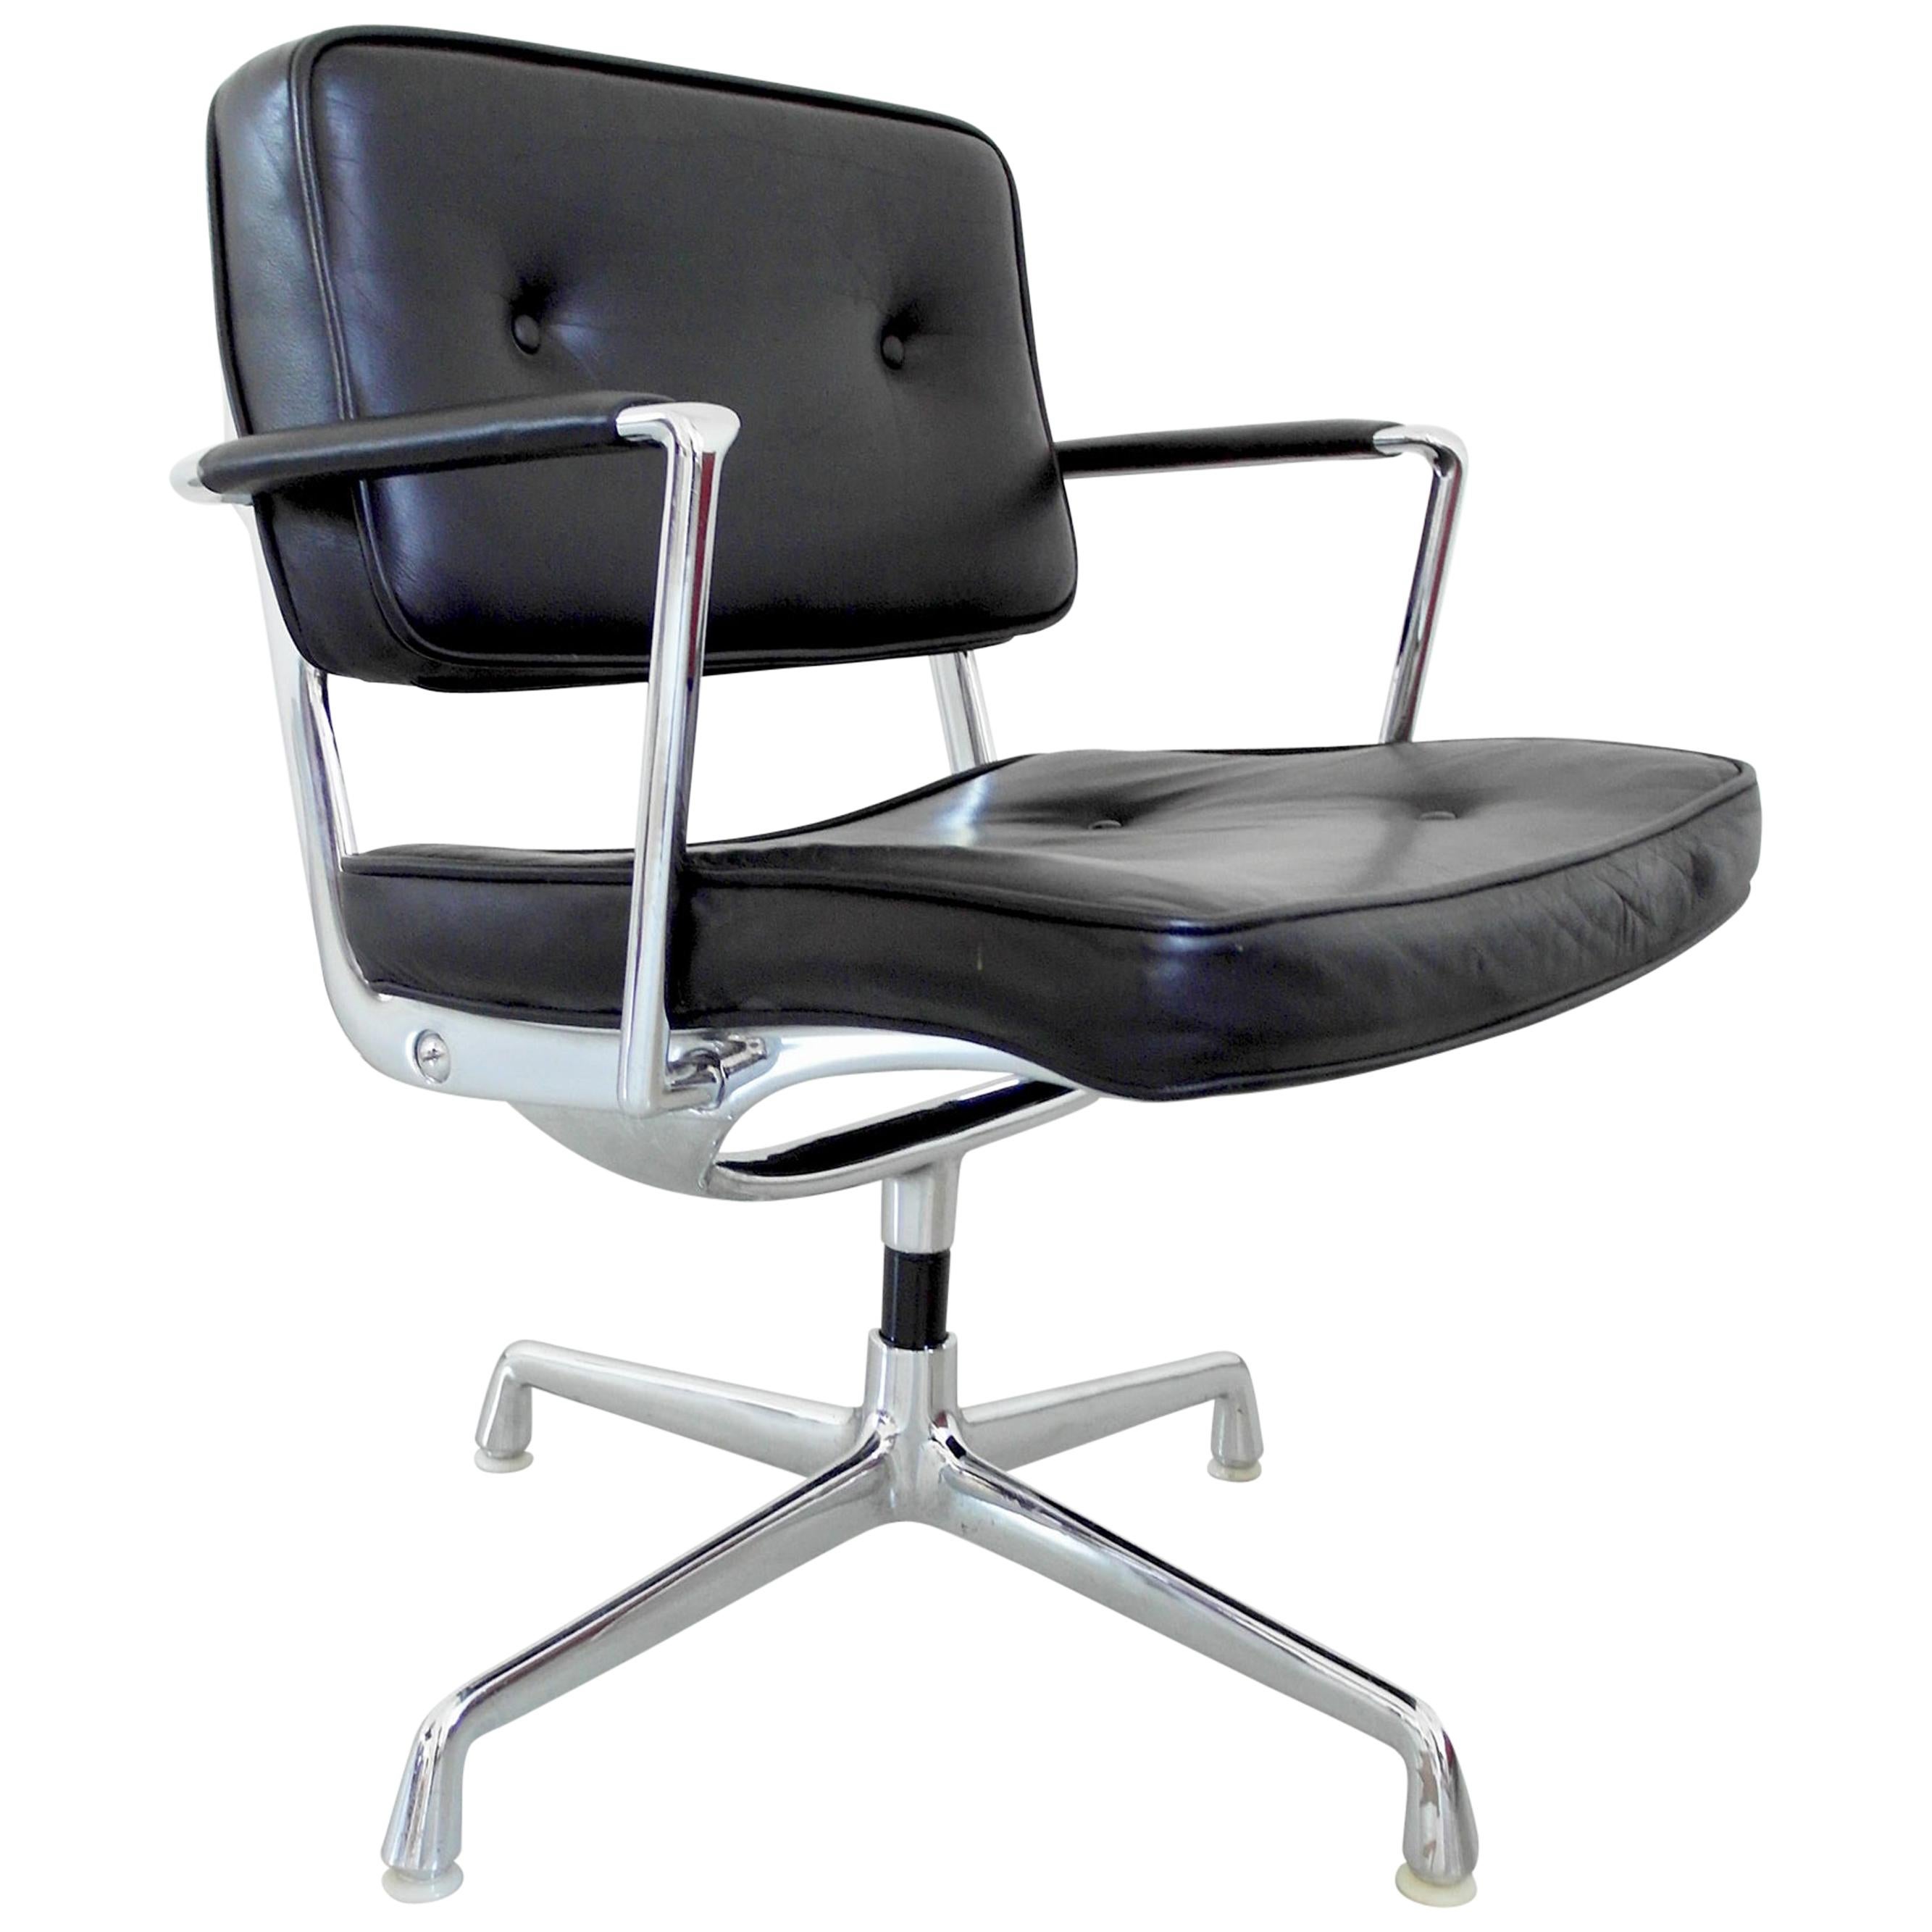 Eames Intermediate chair, early Fehlbaum production for Herman Miller, 1968-1973